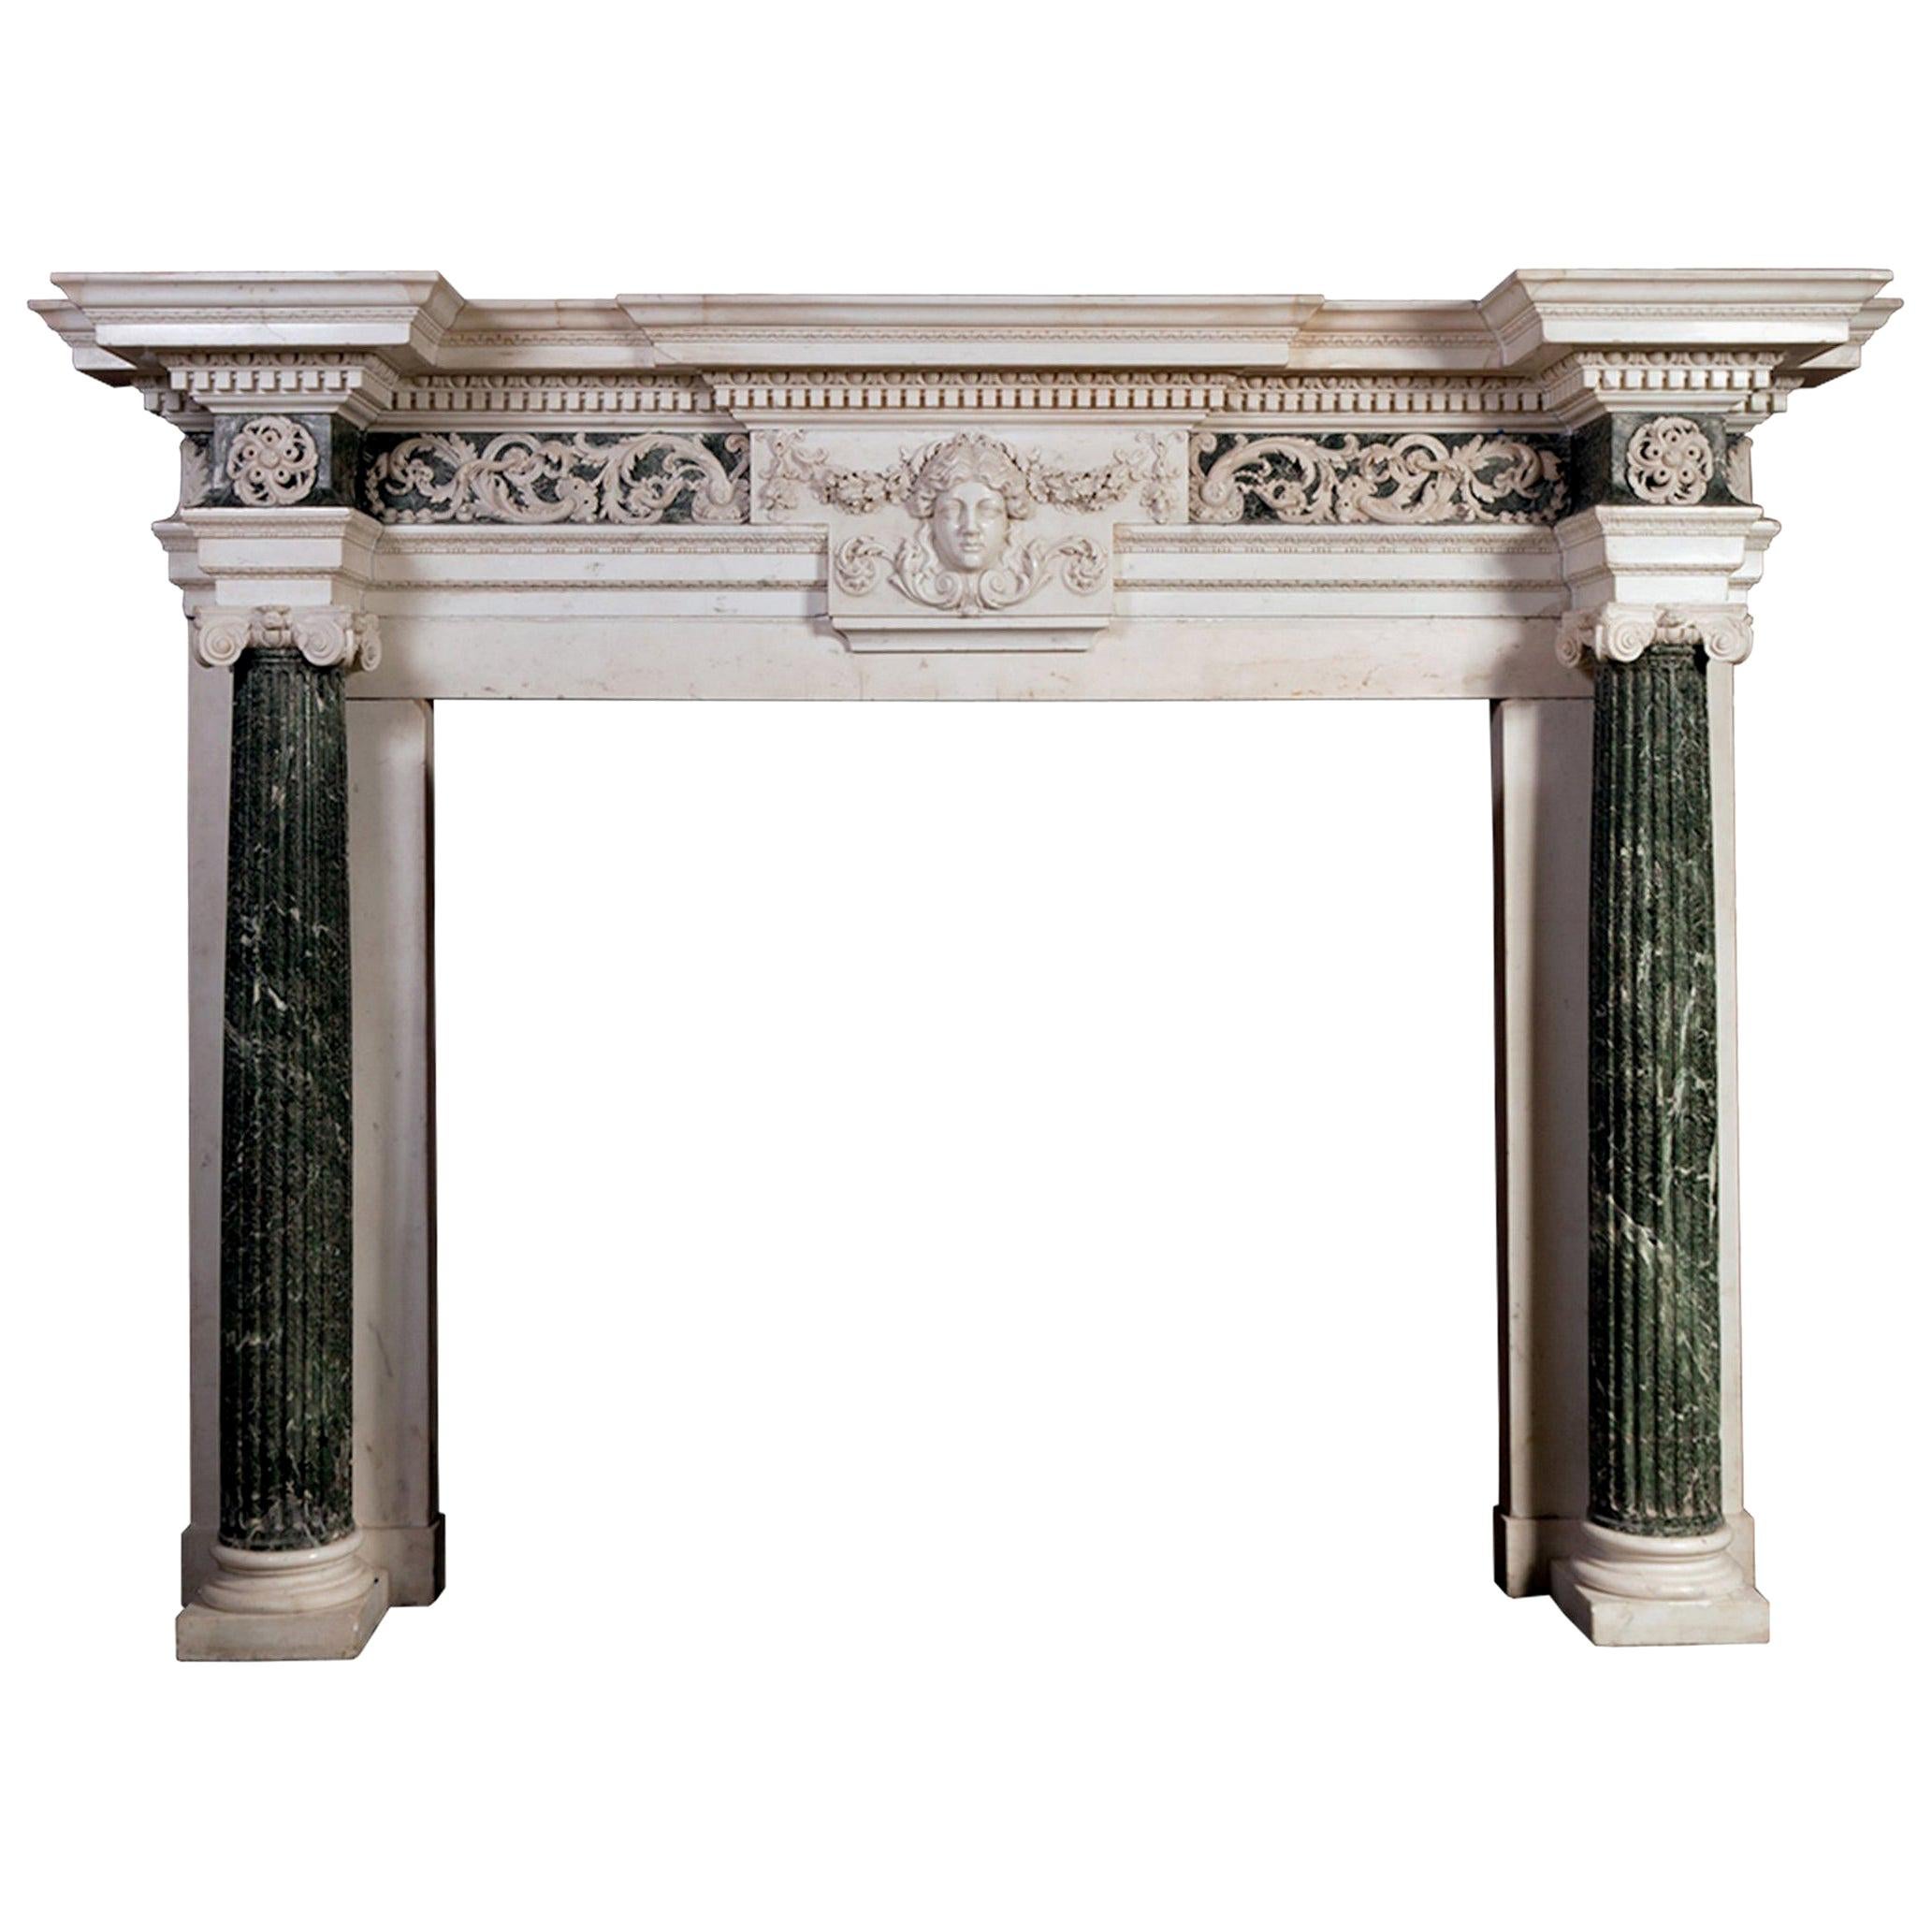 18th Century Marble Mantelpiece Designed by Isaac Ware for Chesterfield House  For Sale